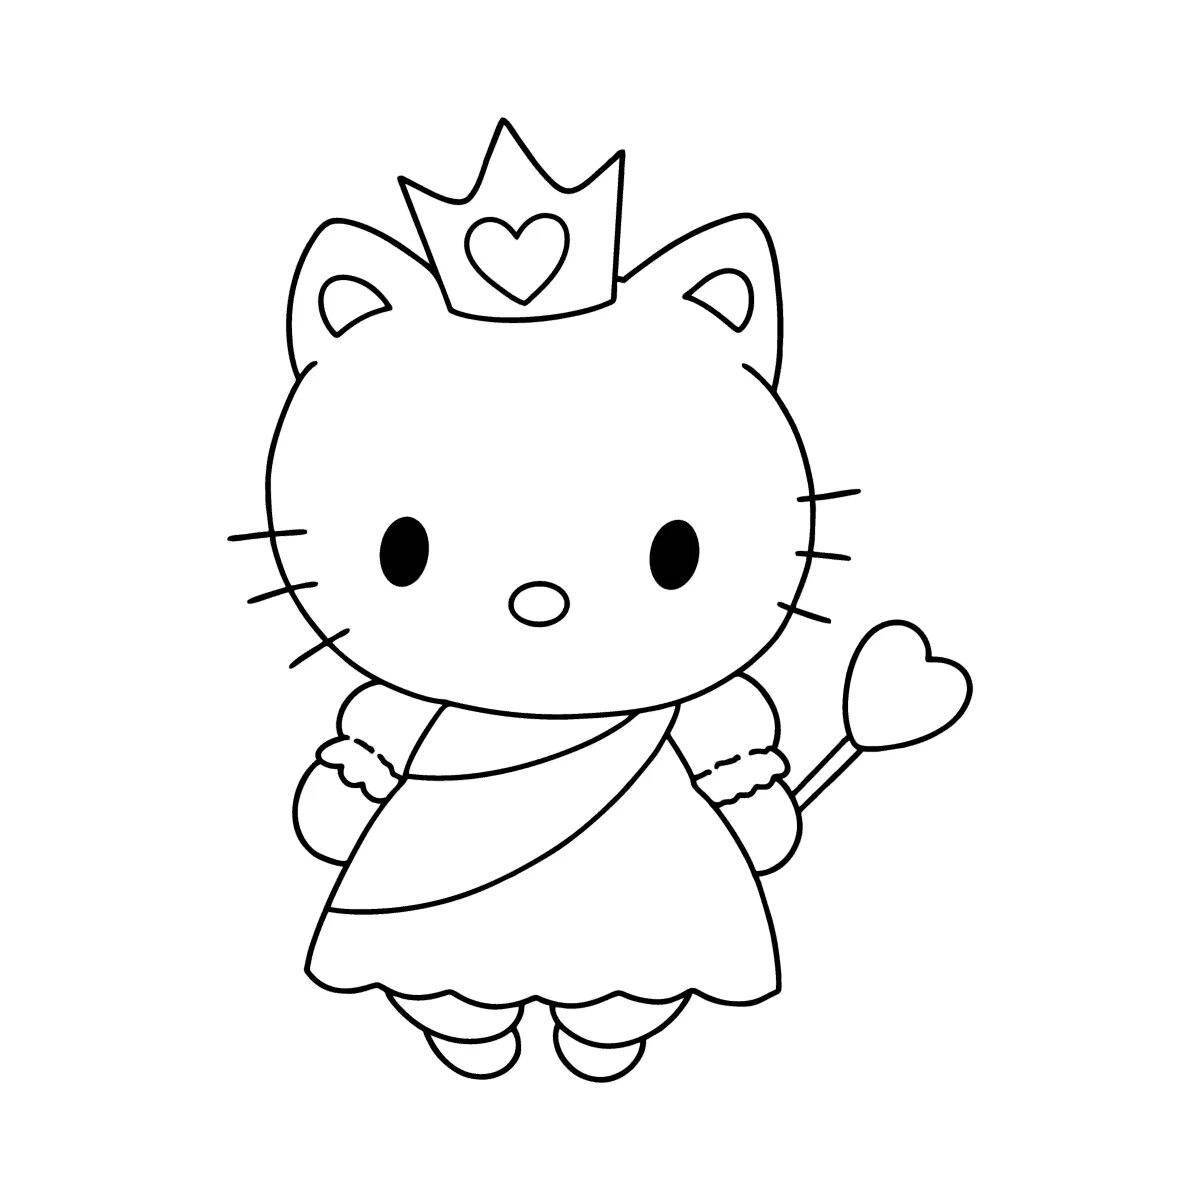 Adorable little hello kitty kuromi coloring page